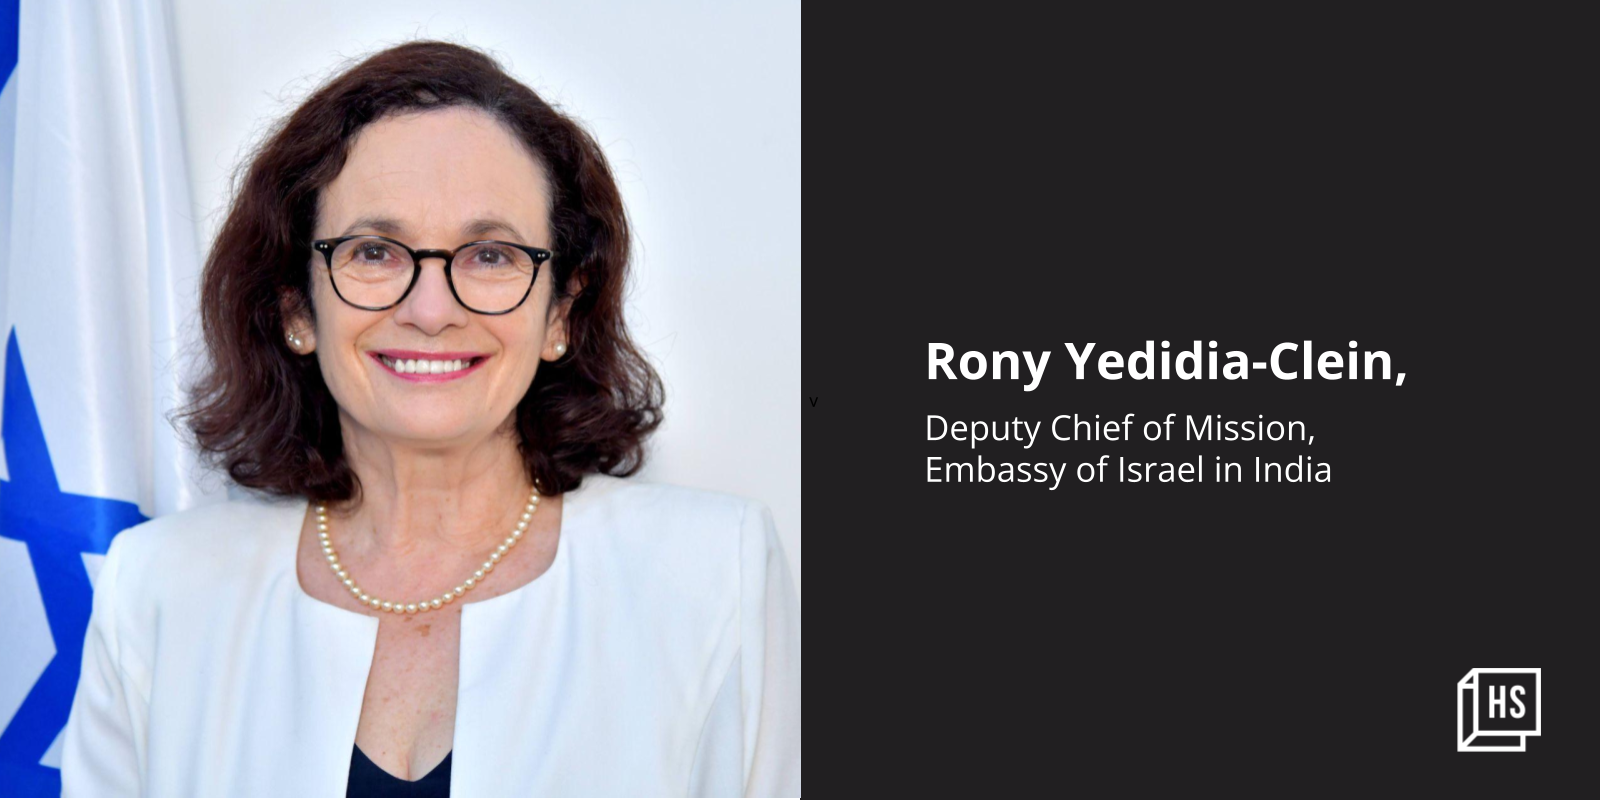 India and Israel can bring together talents that can benefit the entire world, says Israeli diplomat Rony Yedidia-Clein